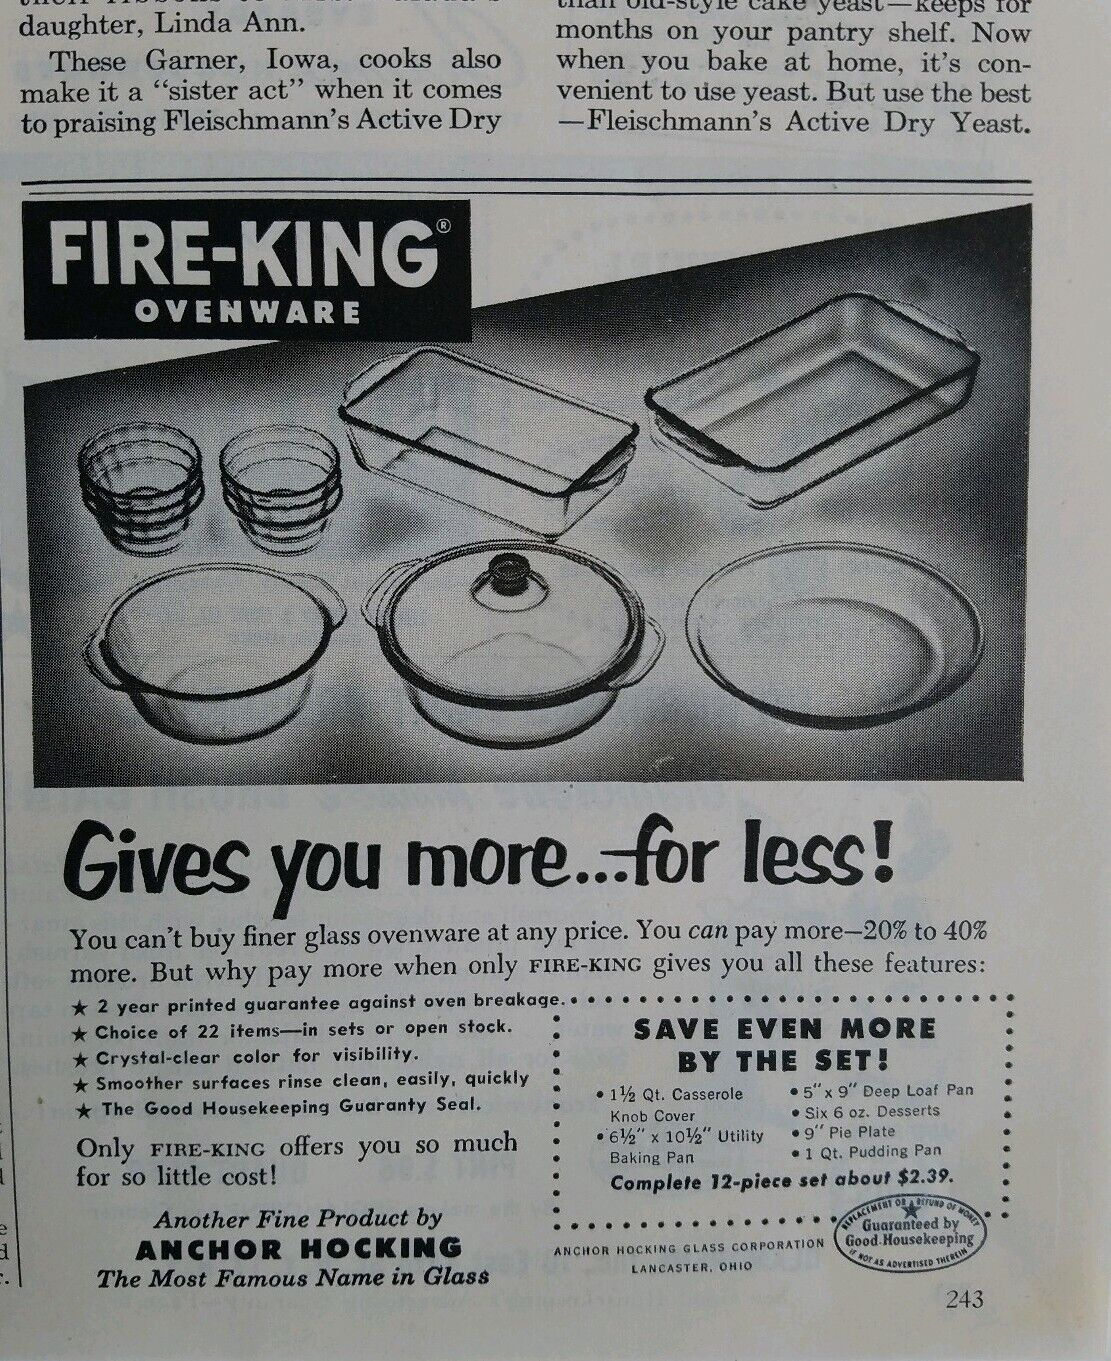 1954 Anchor Hocking Fire King ovenware glassware gives you more for Less ad